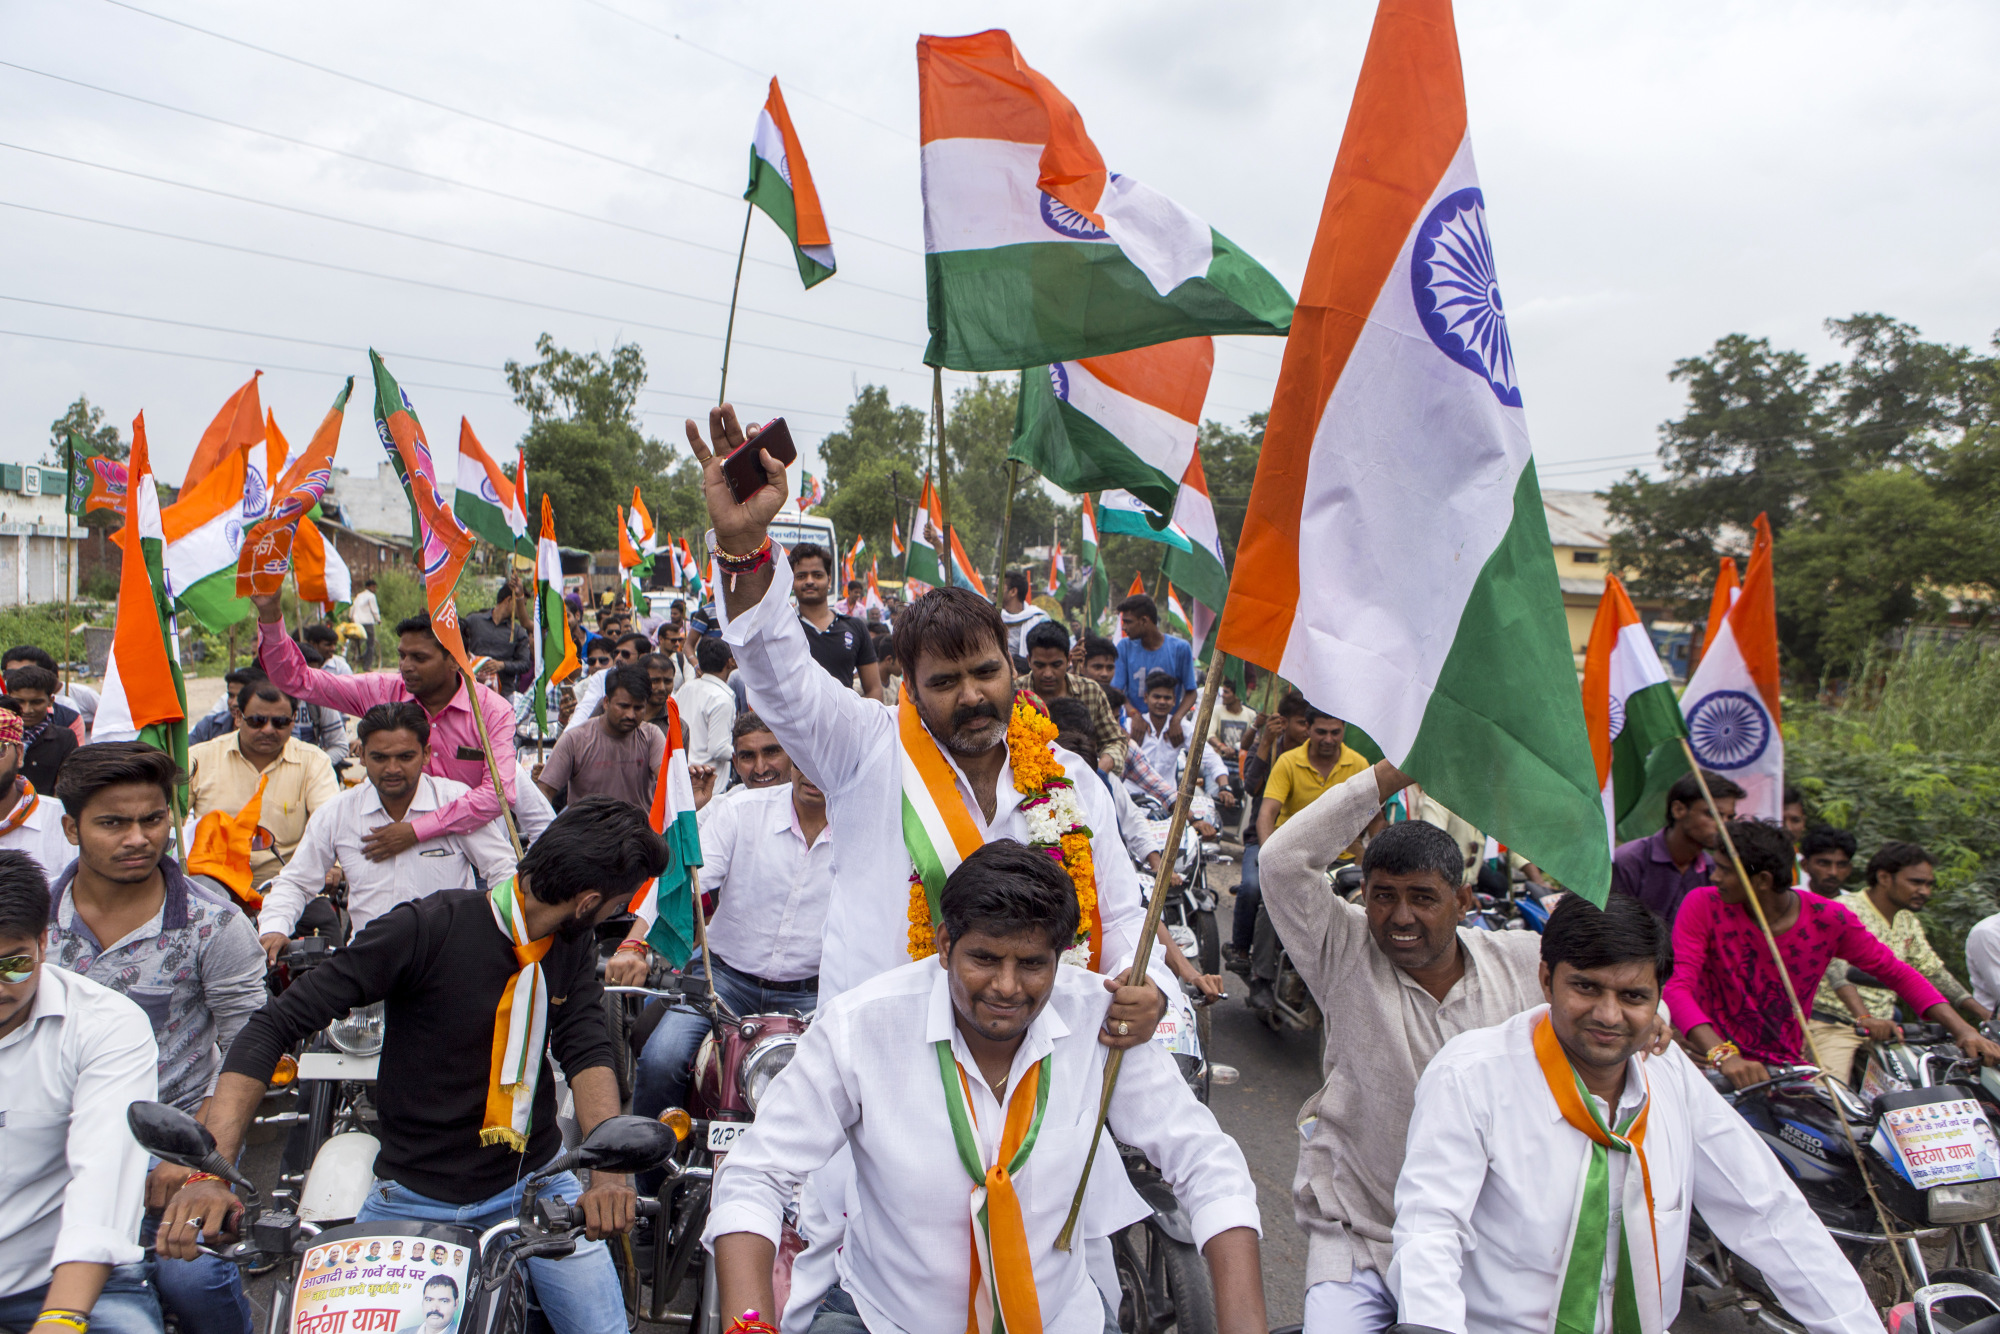 Bharatiya Janata Party (BJP) members and supporters carry India national flags during a&nbsp;rally.